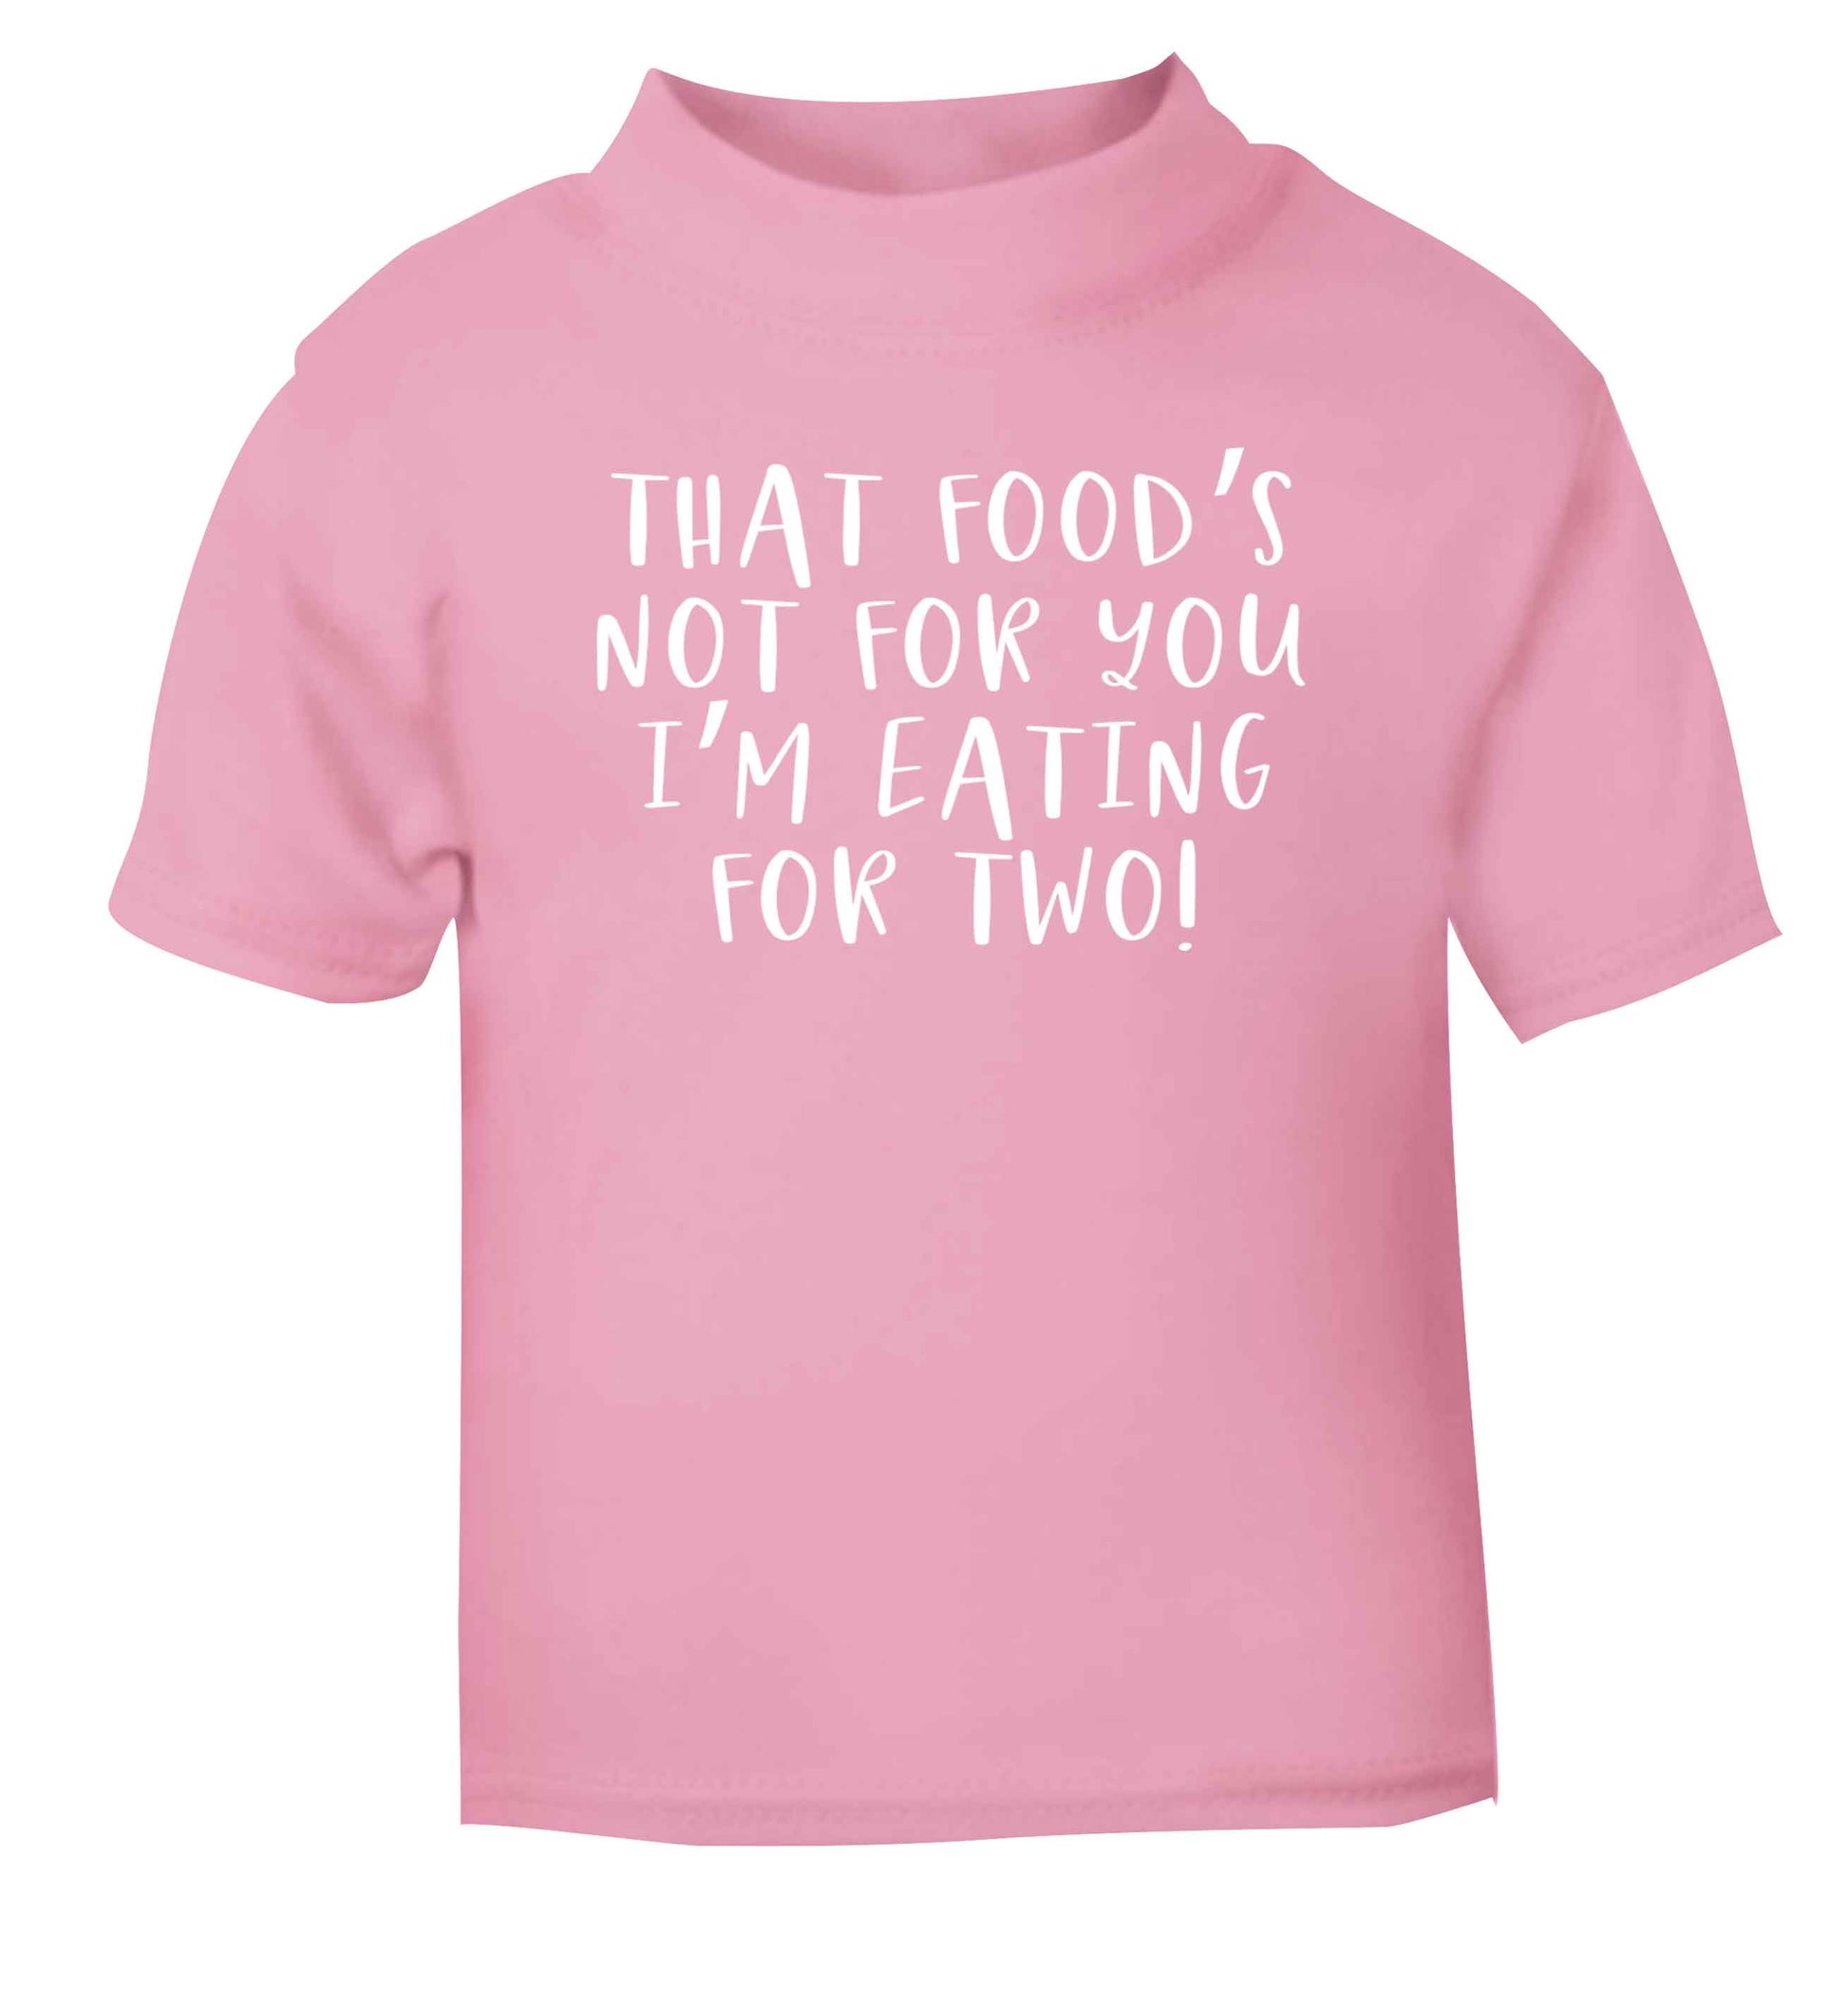 That food's not for you I'm eating for two light pink Baby Toddler Tshirt 2 Years